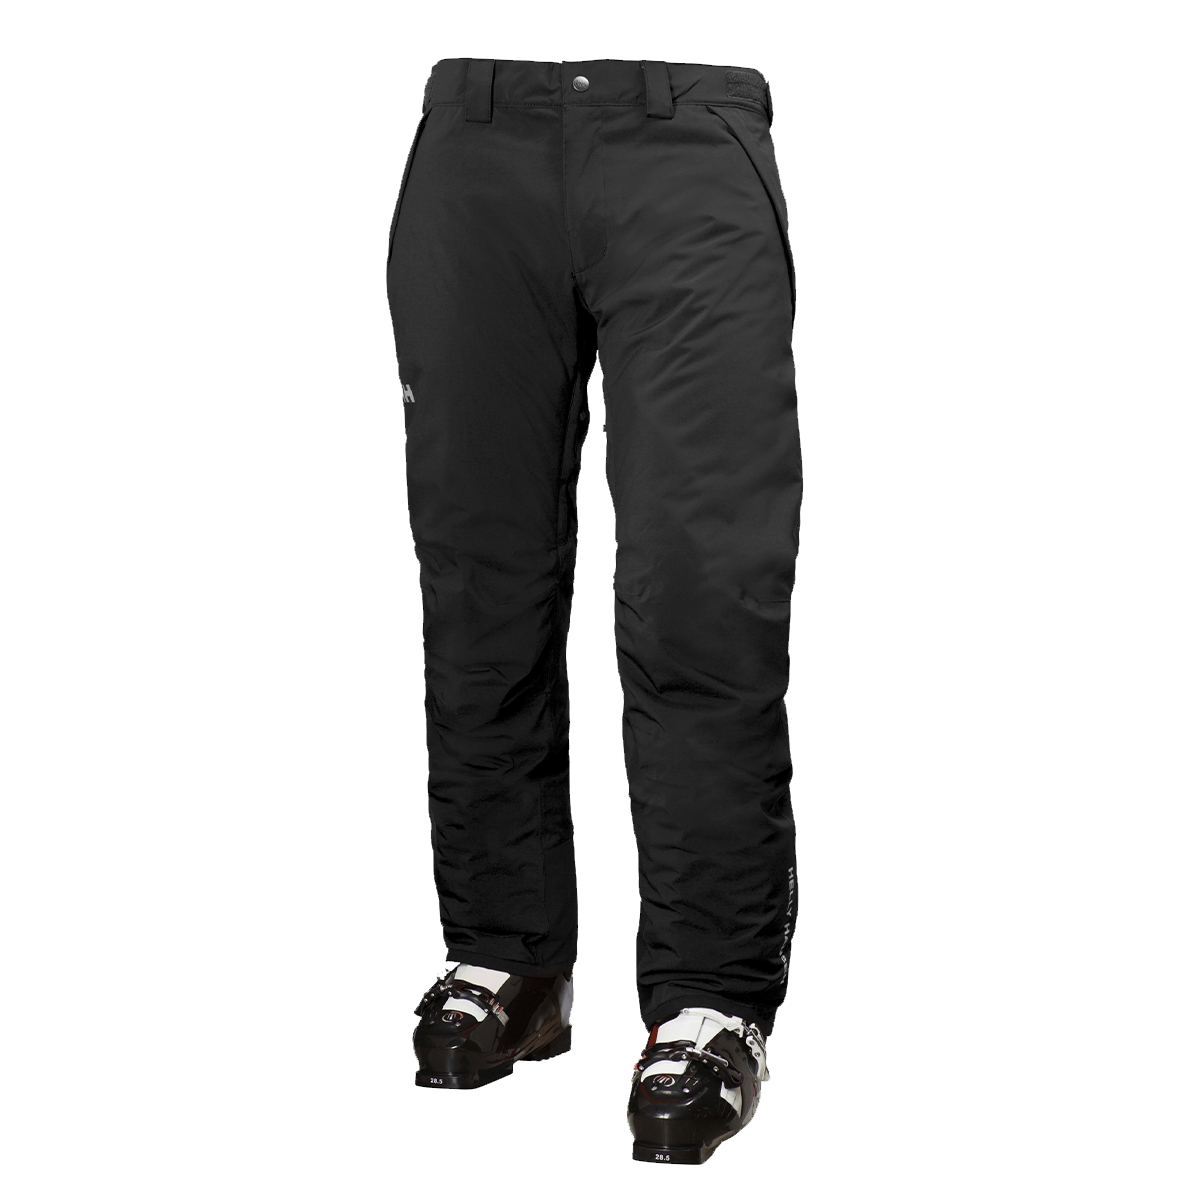 VELOCITY INSULATED PANT Helly Hansen